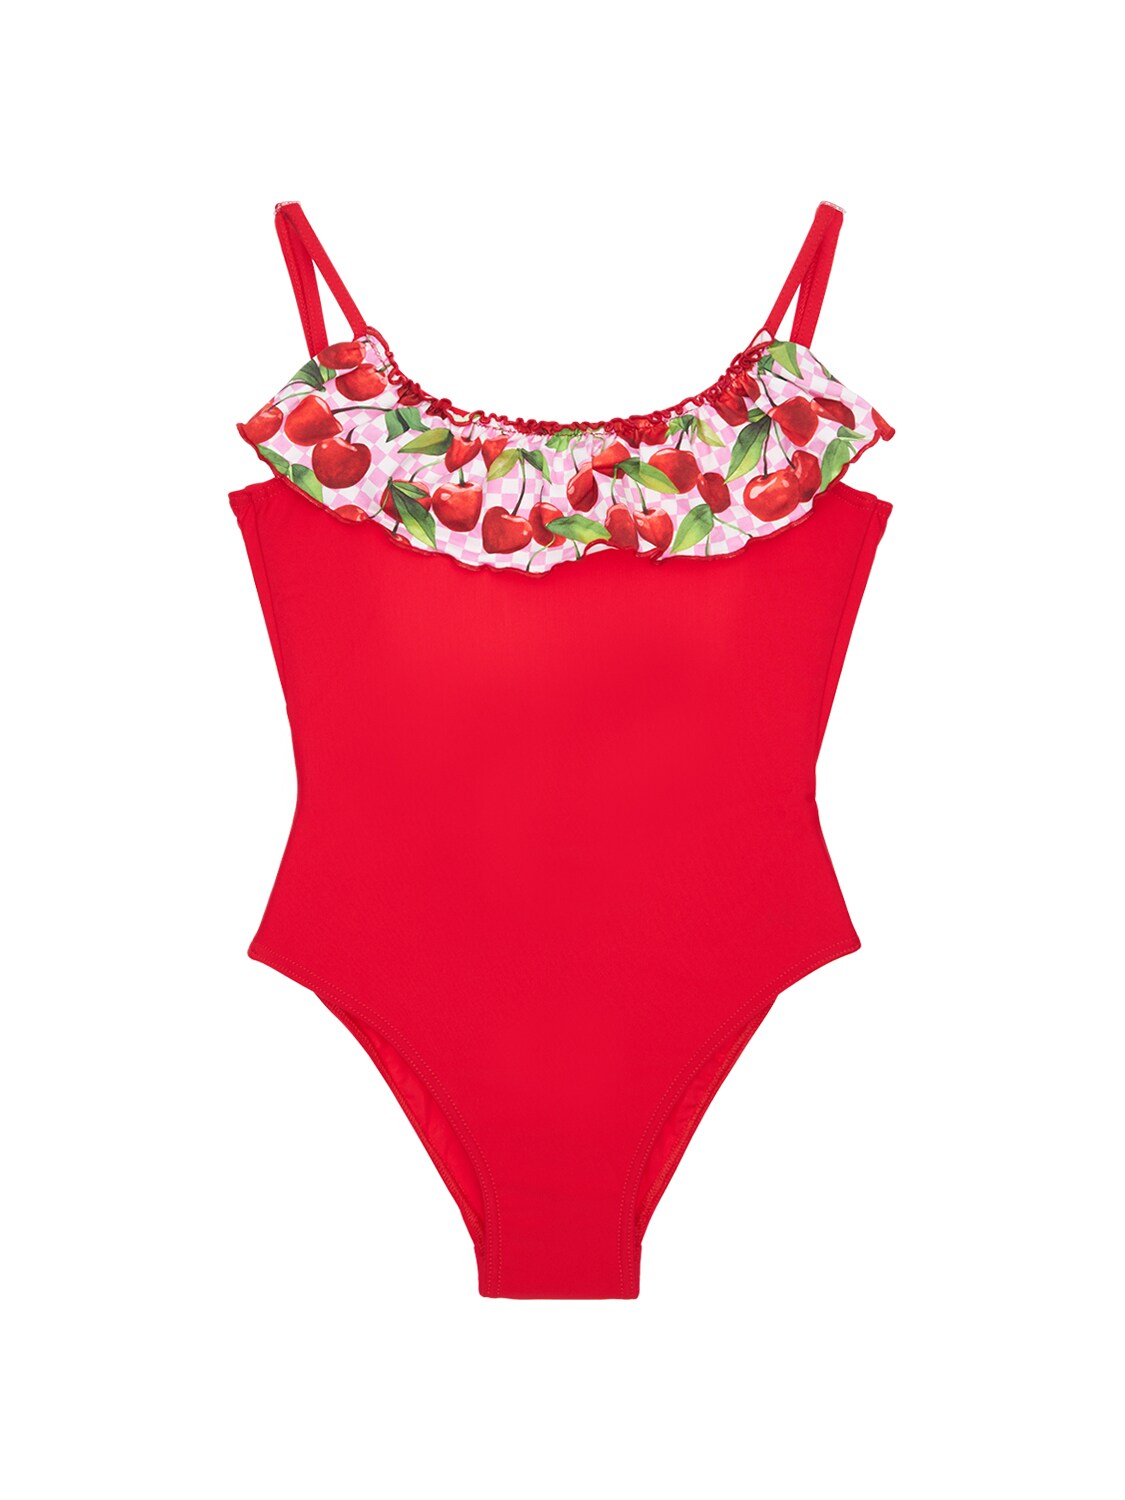 Selini Action Kids' Cherry Ruffle One Piece Swimsuit In Red | ModeSens